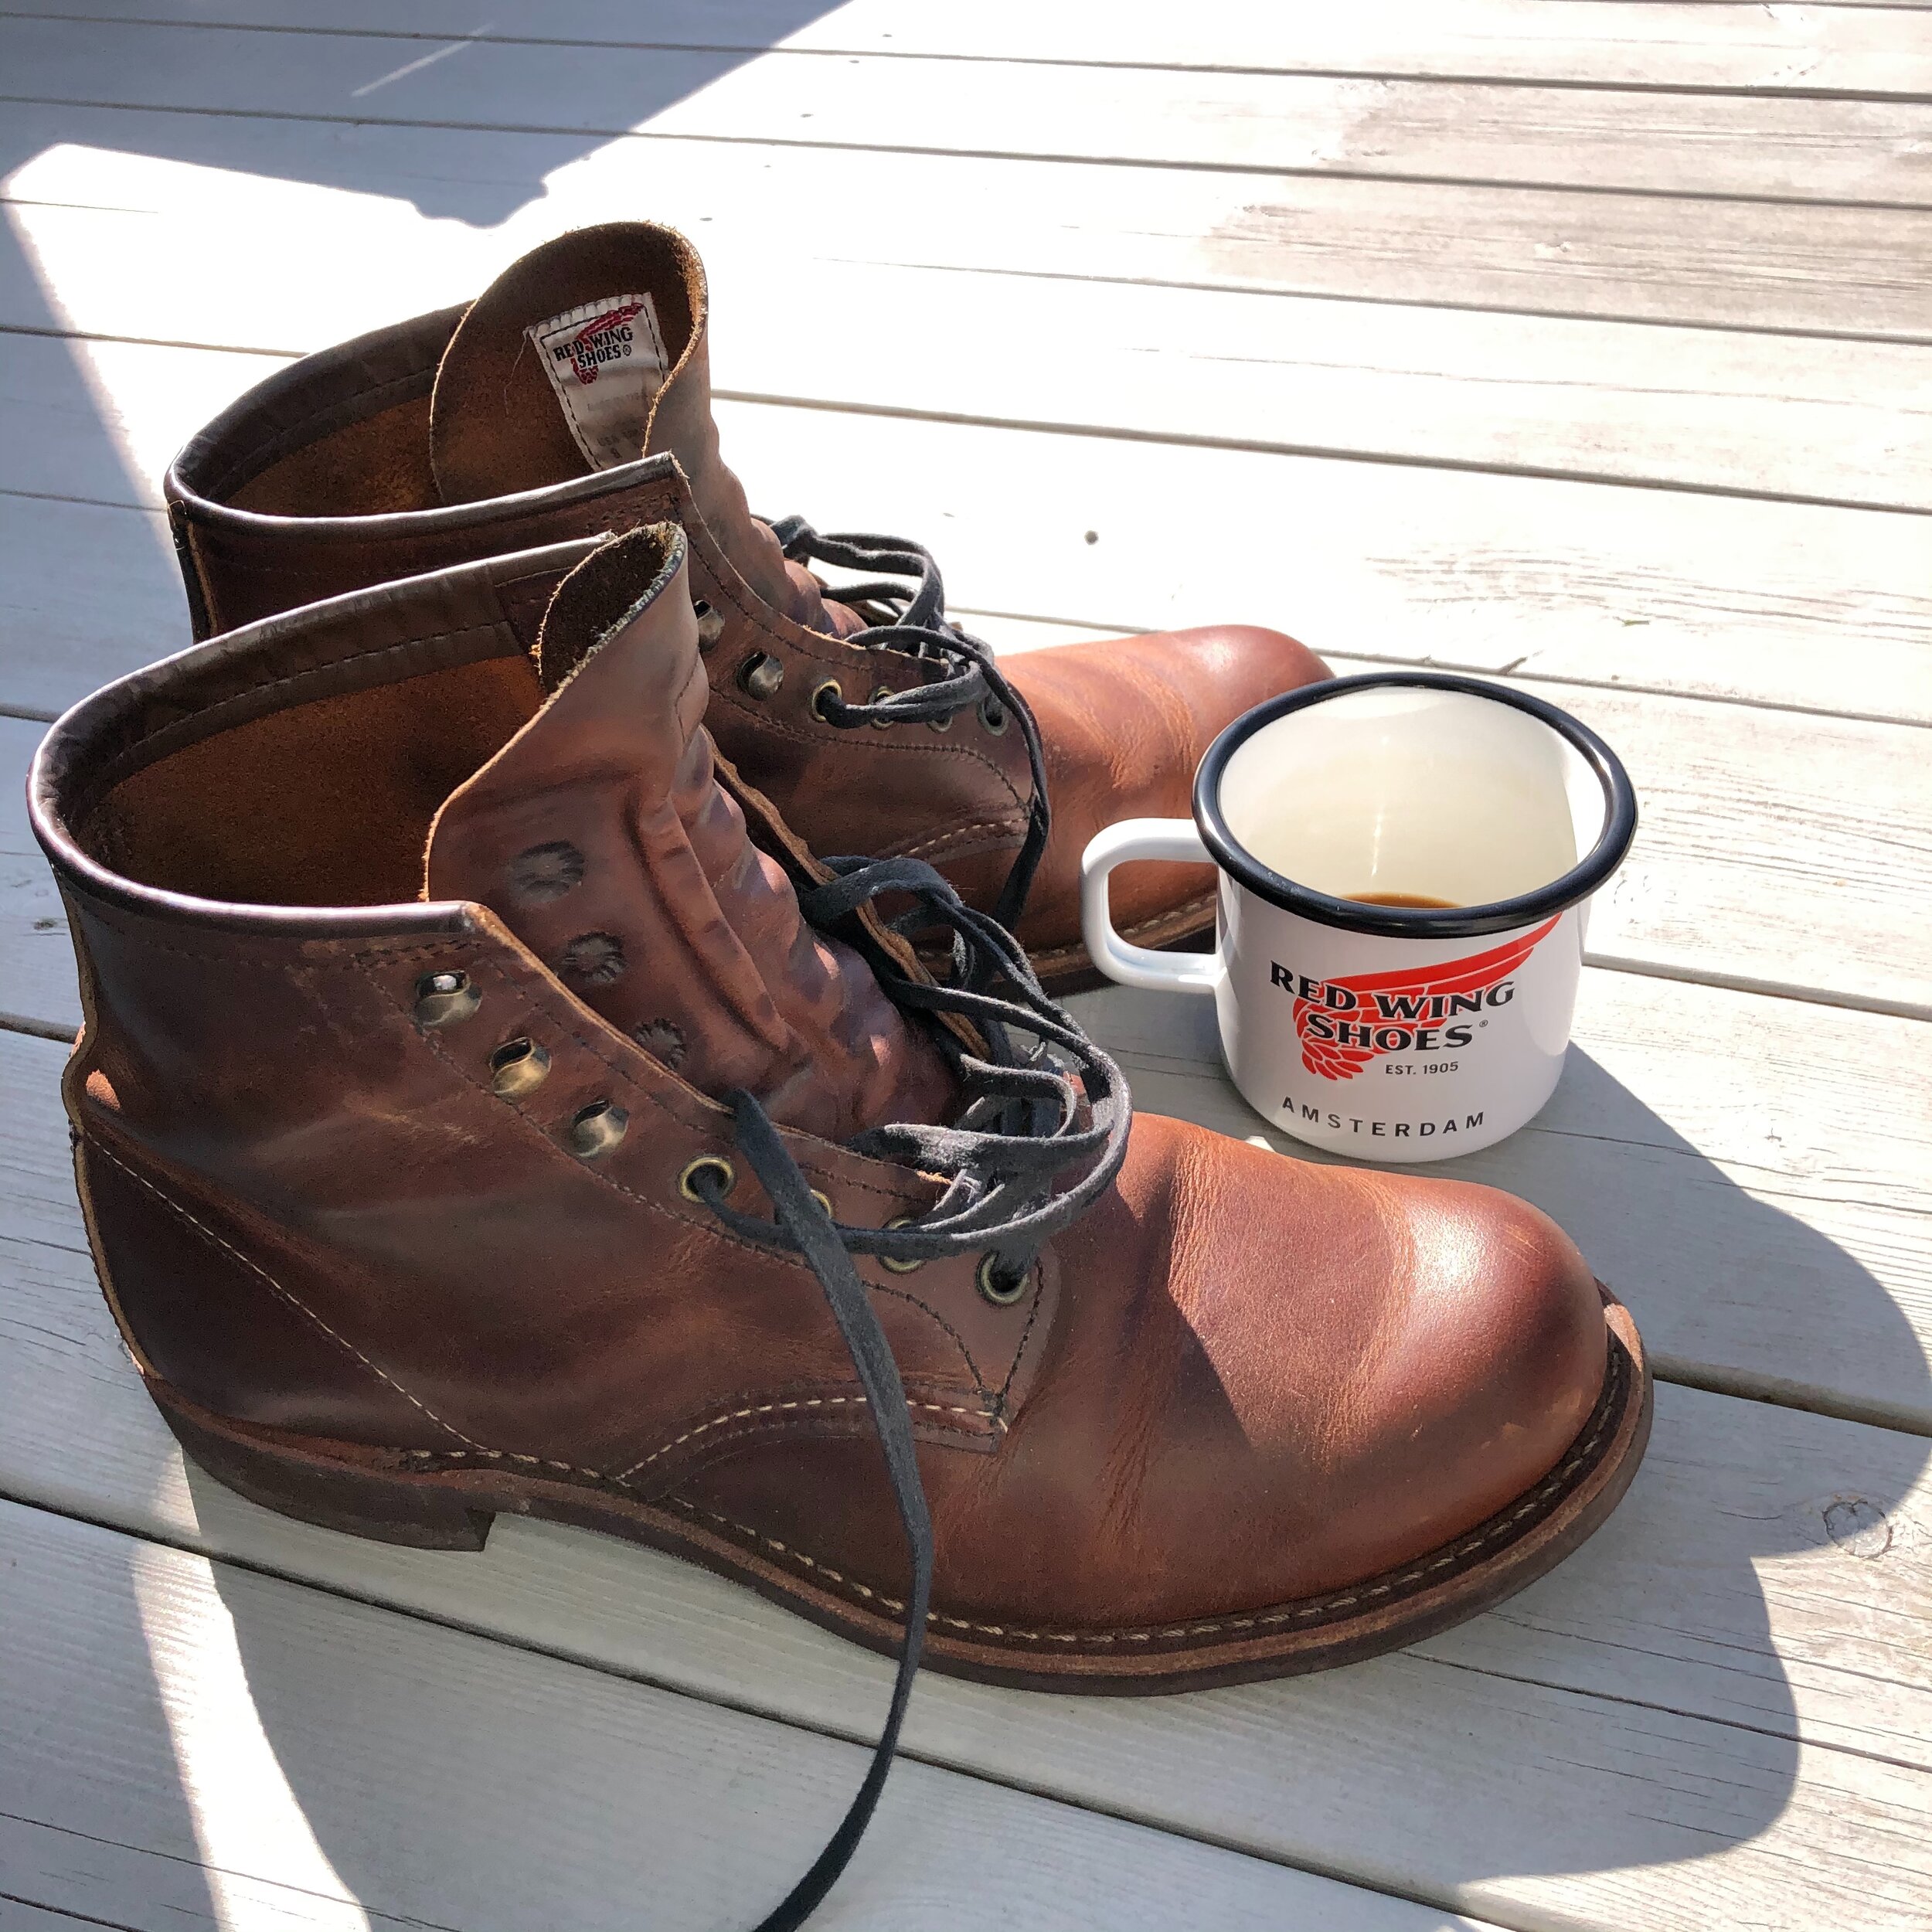 philosopher dress Product Red Wing Heritage Boots — SOEL creative